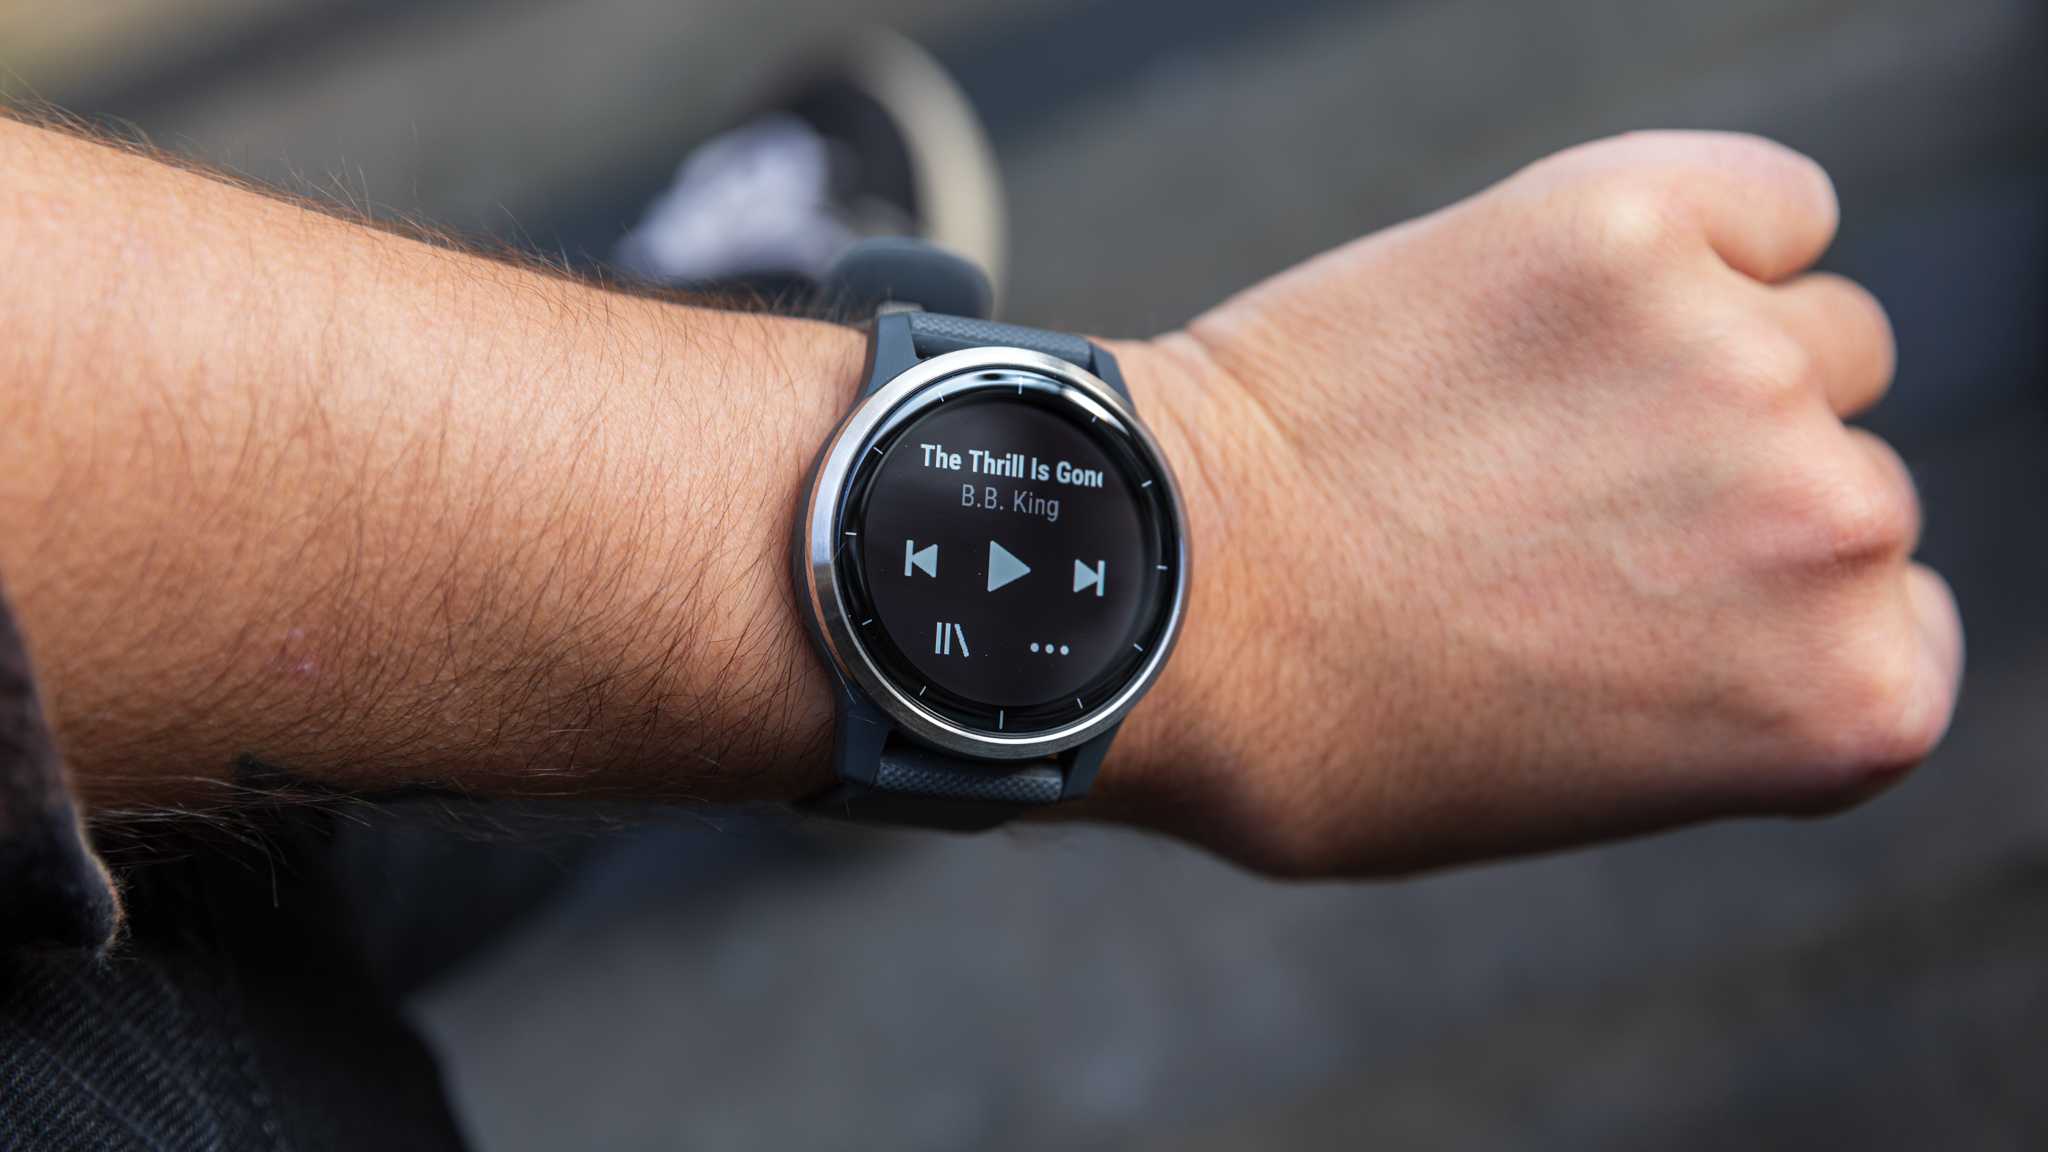 Garmin Vivoactive 4S Smartwatch Review: Perfect Activity Tracking Tool